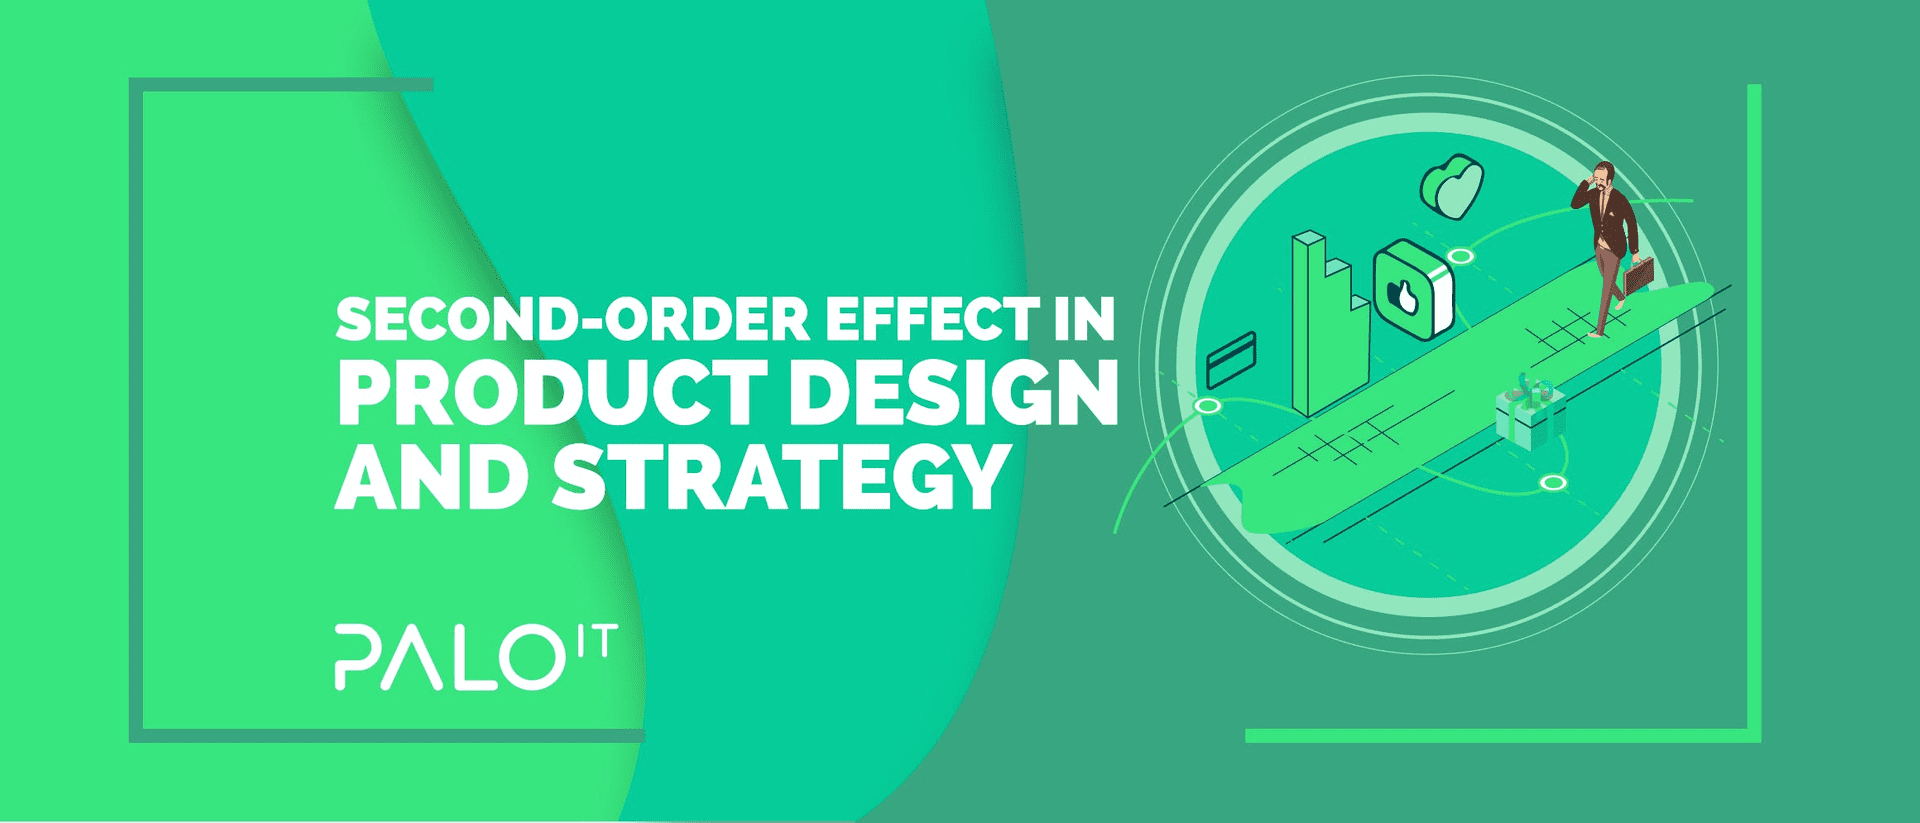 Second-Order Effect in Product Design and Strategy